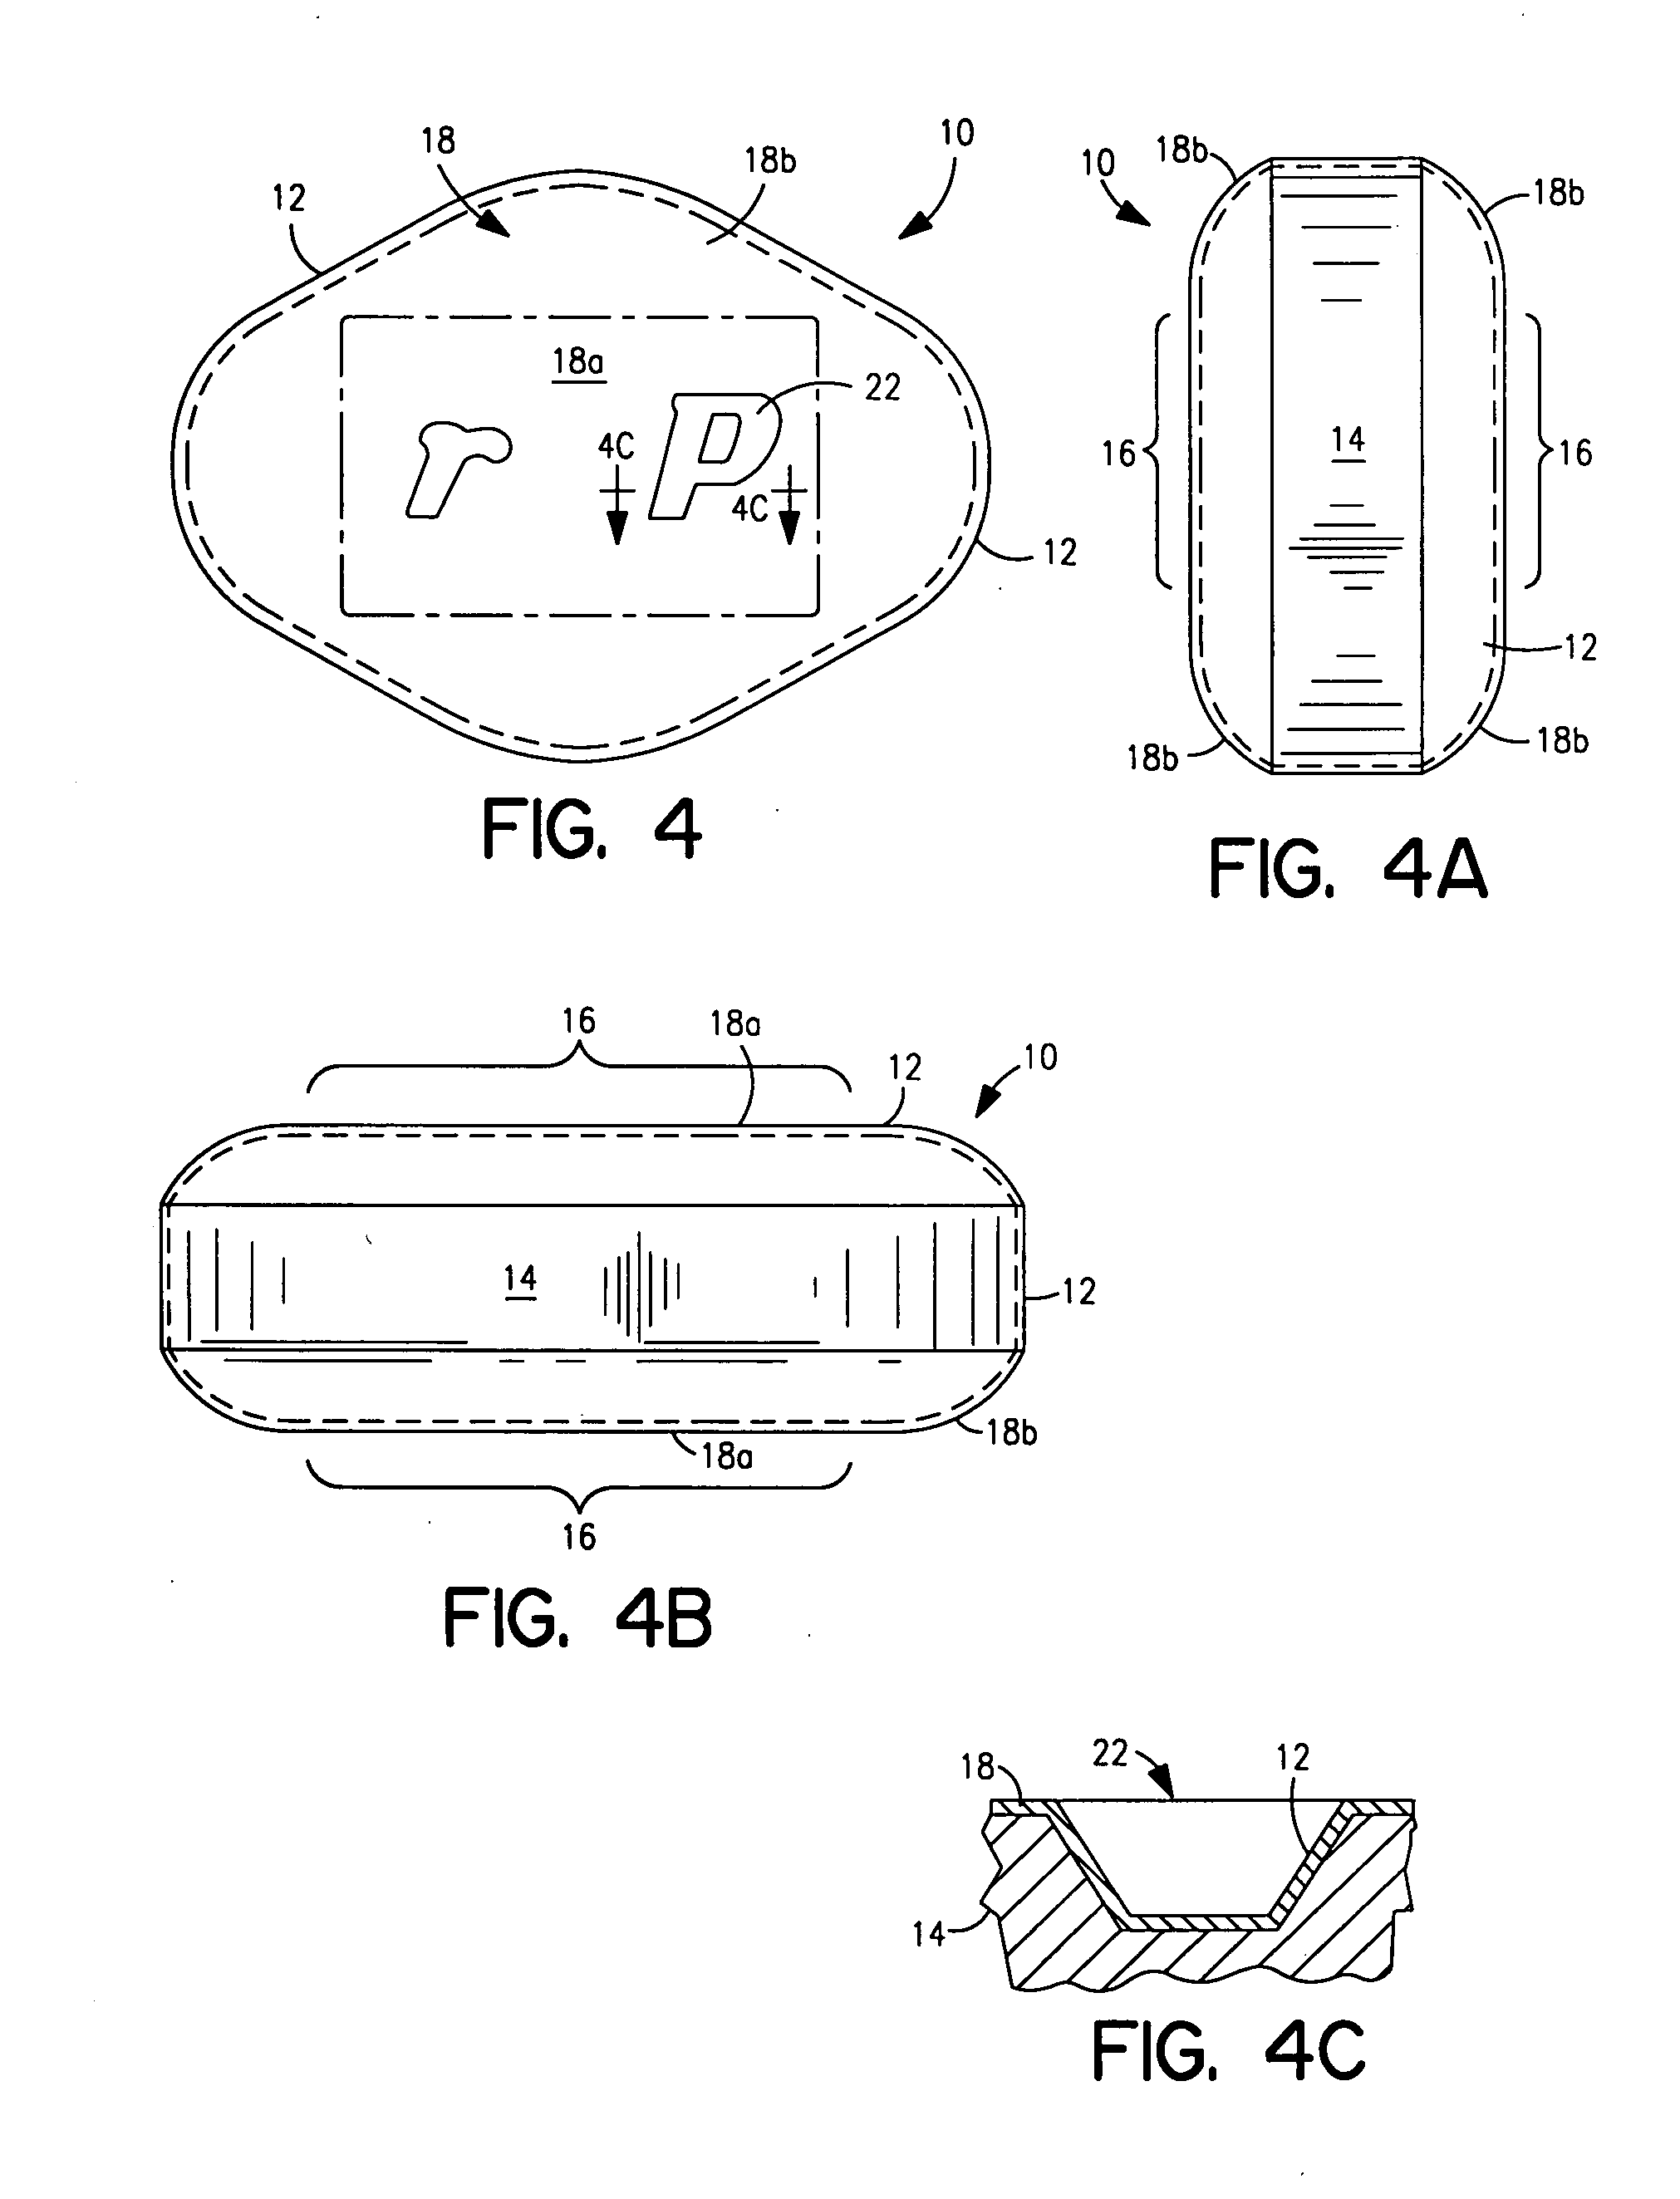 Edible holographic products, particularly pharmaceuticals and methods and apparatus for producing same